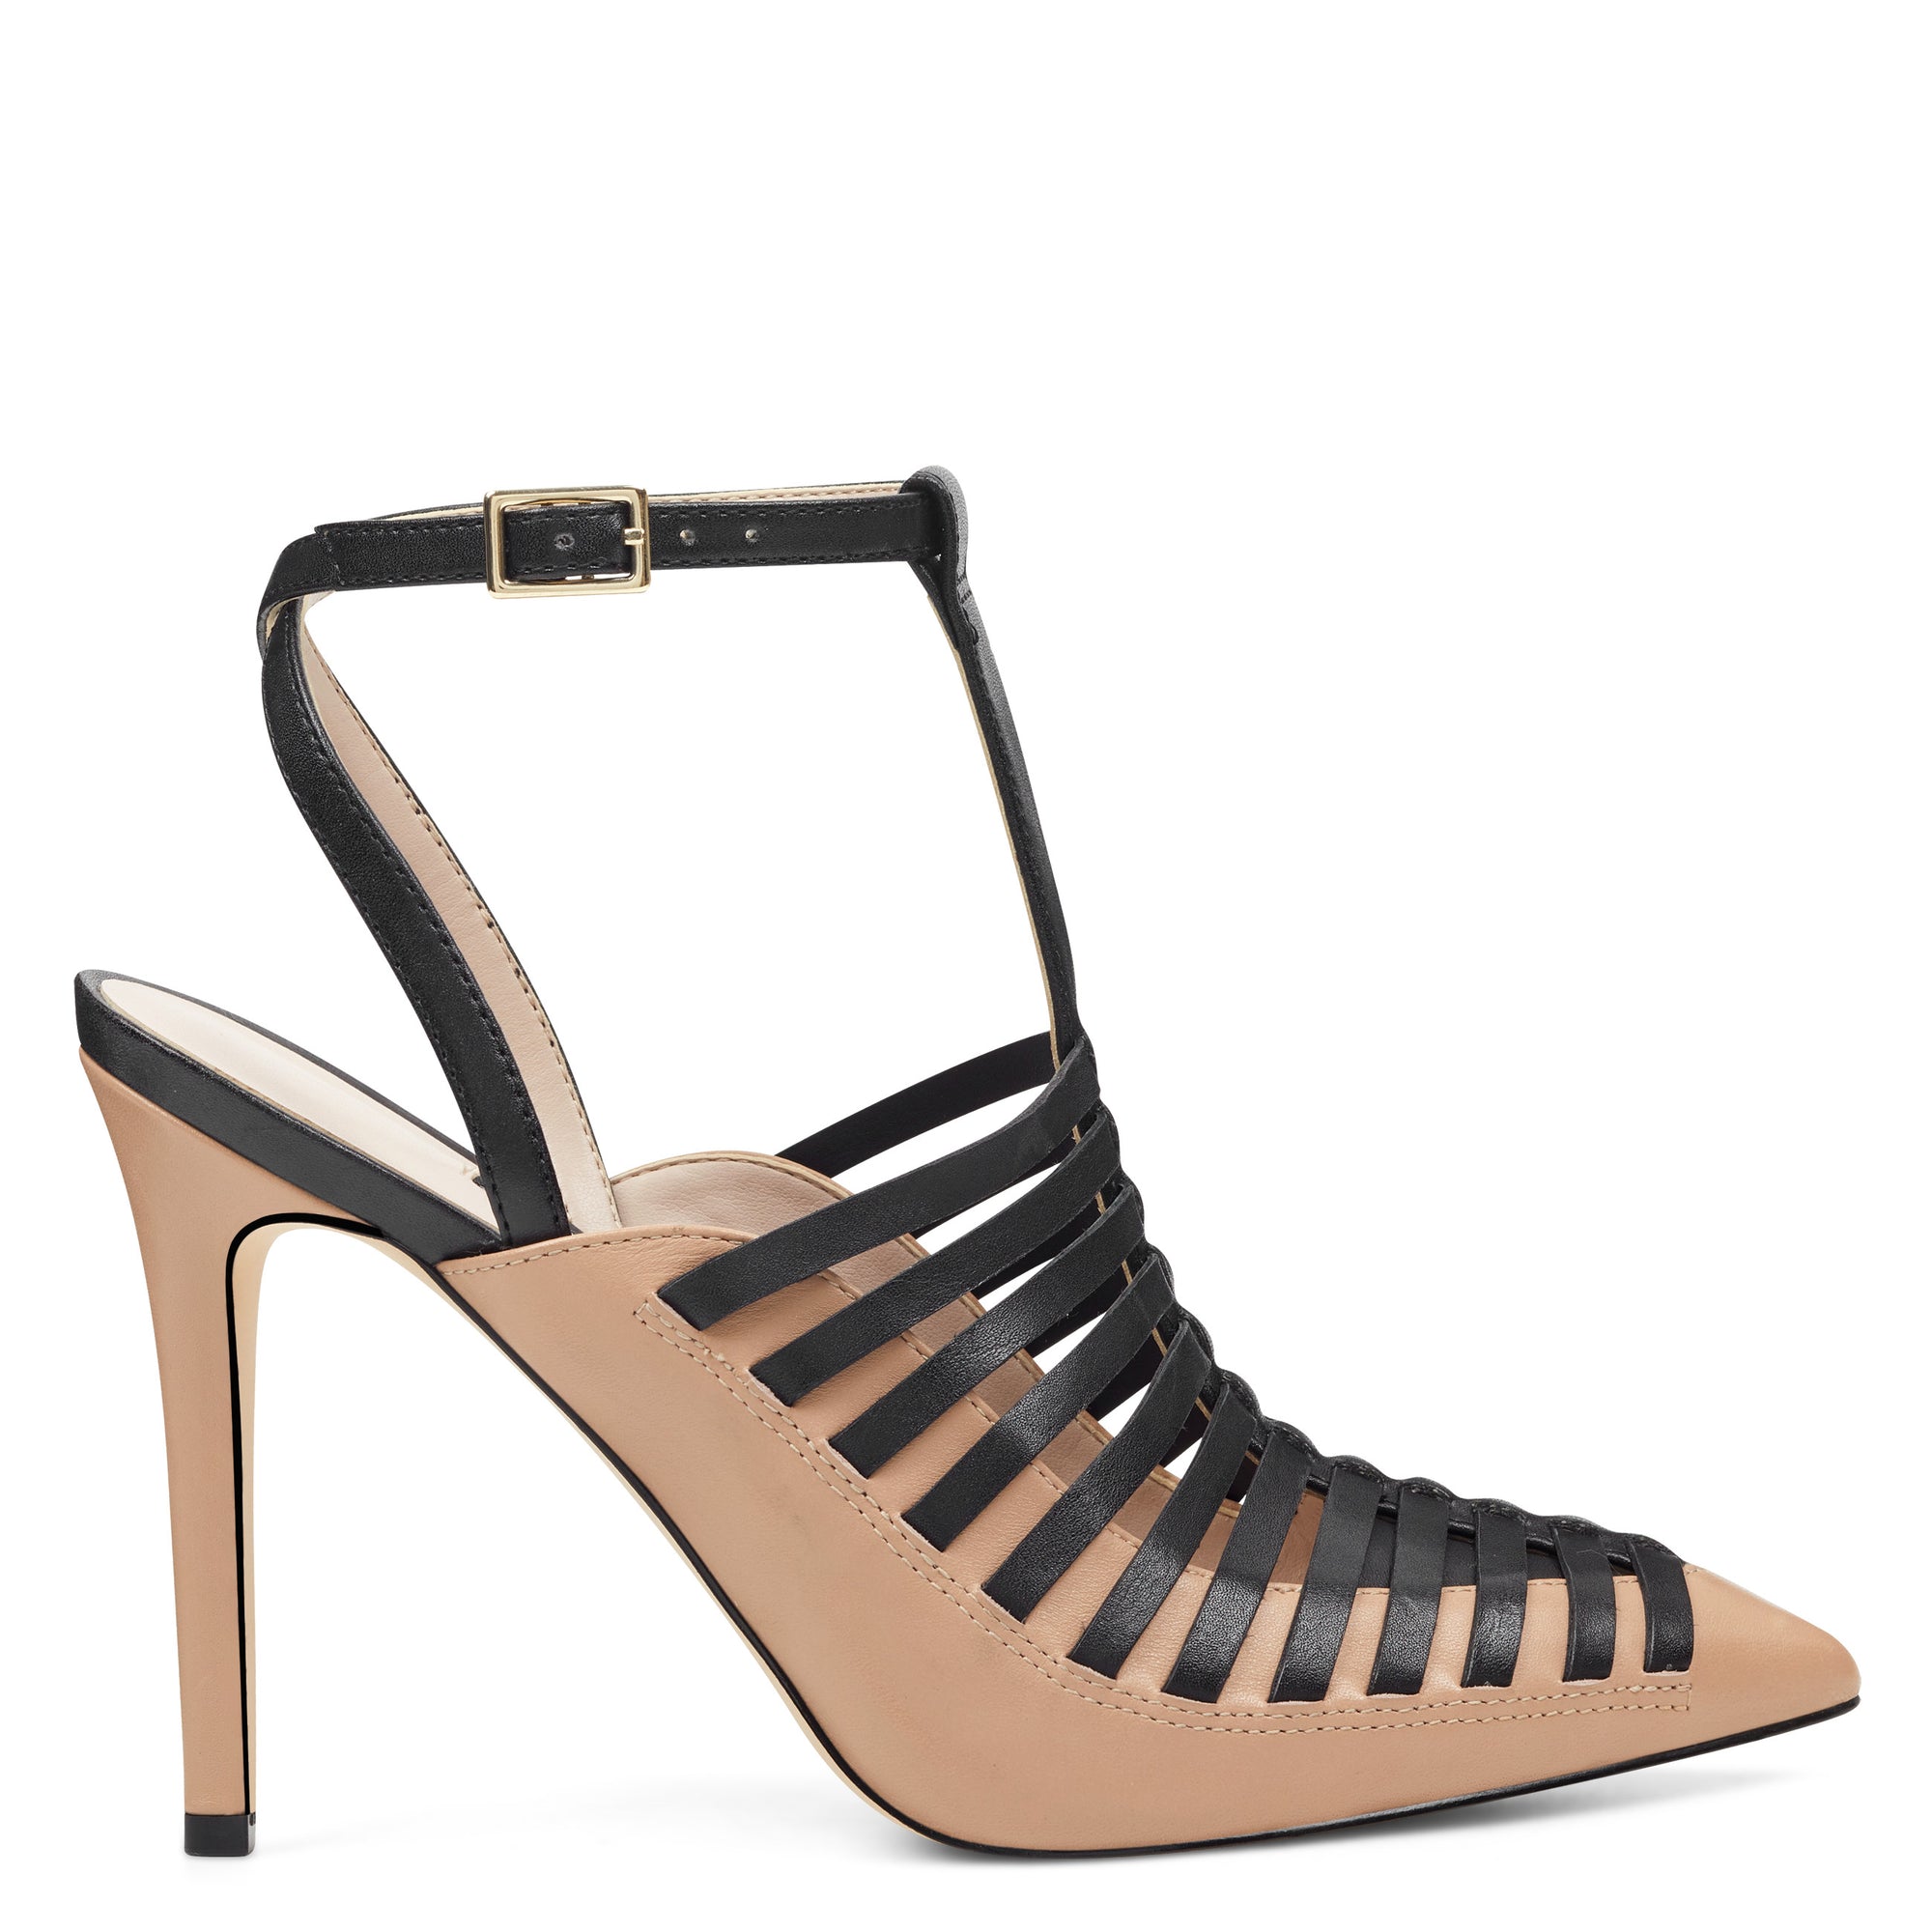 Tlank Strappy Pumps - Nine West